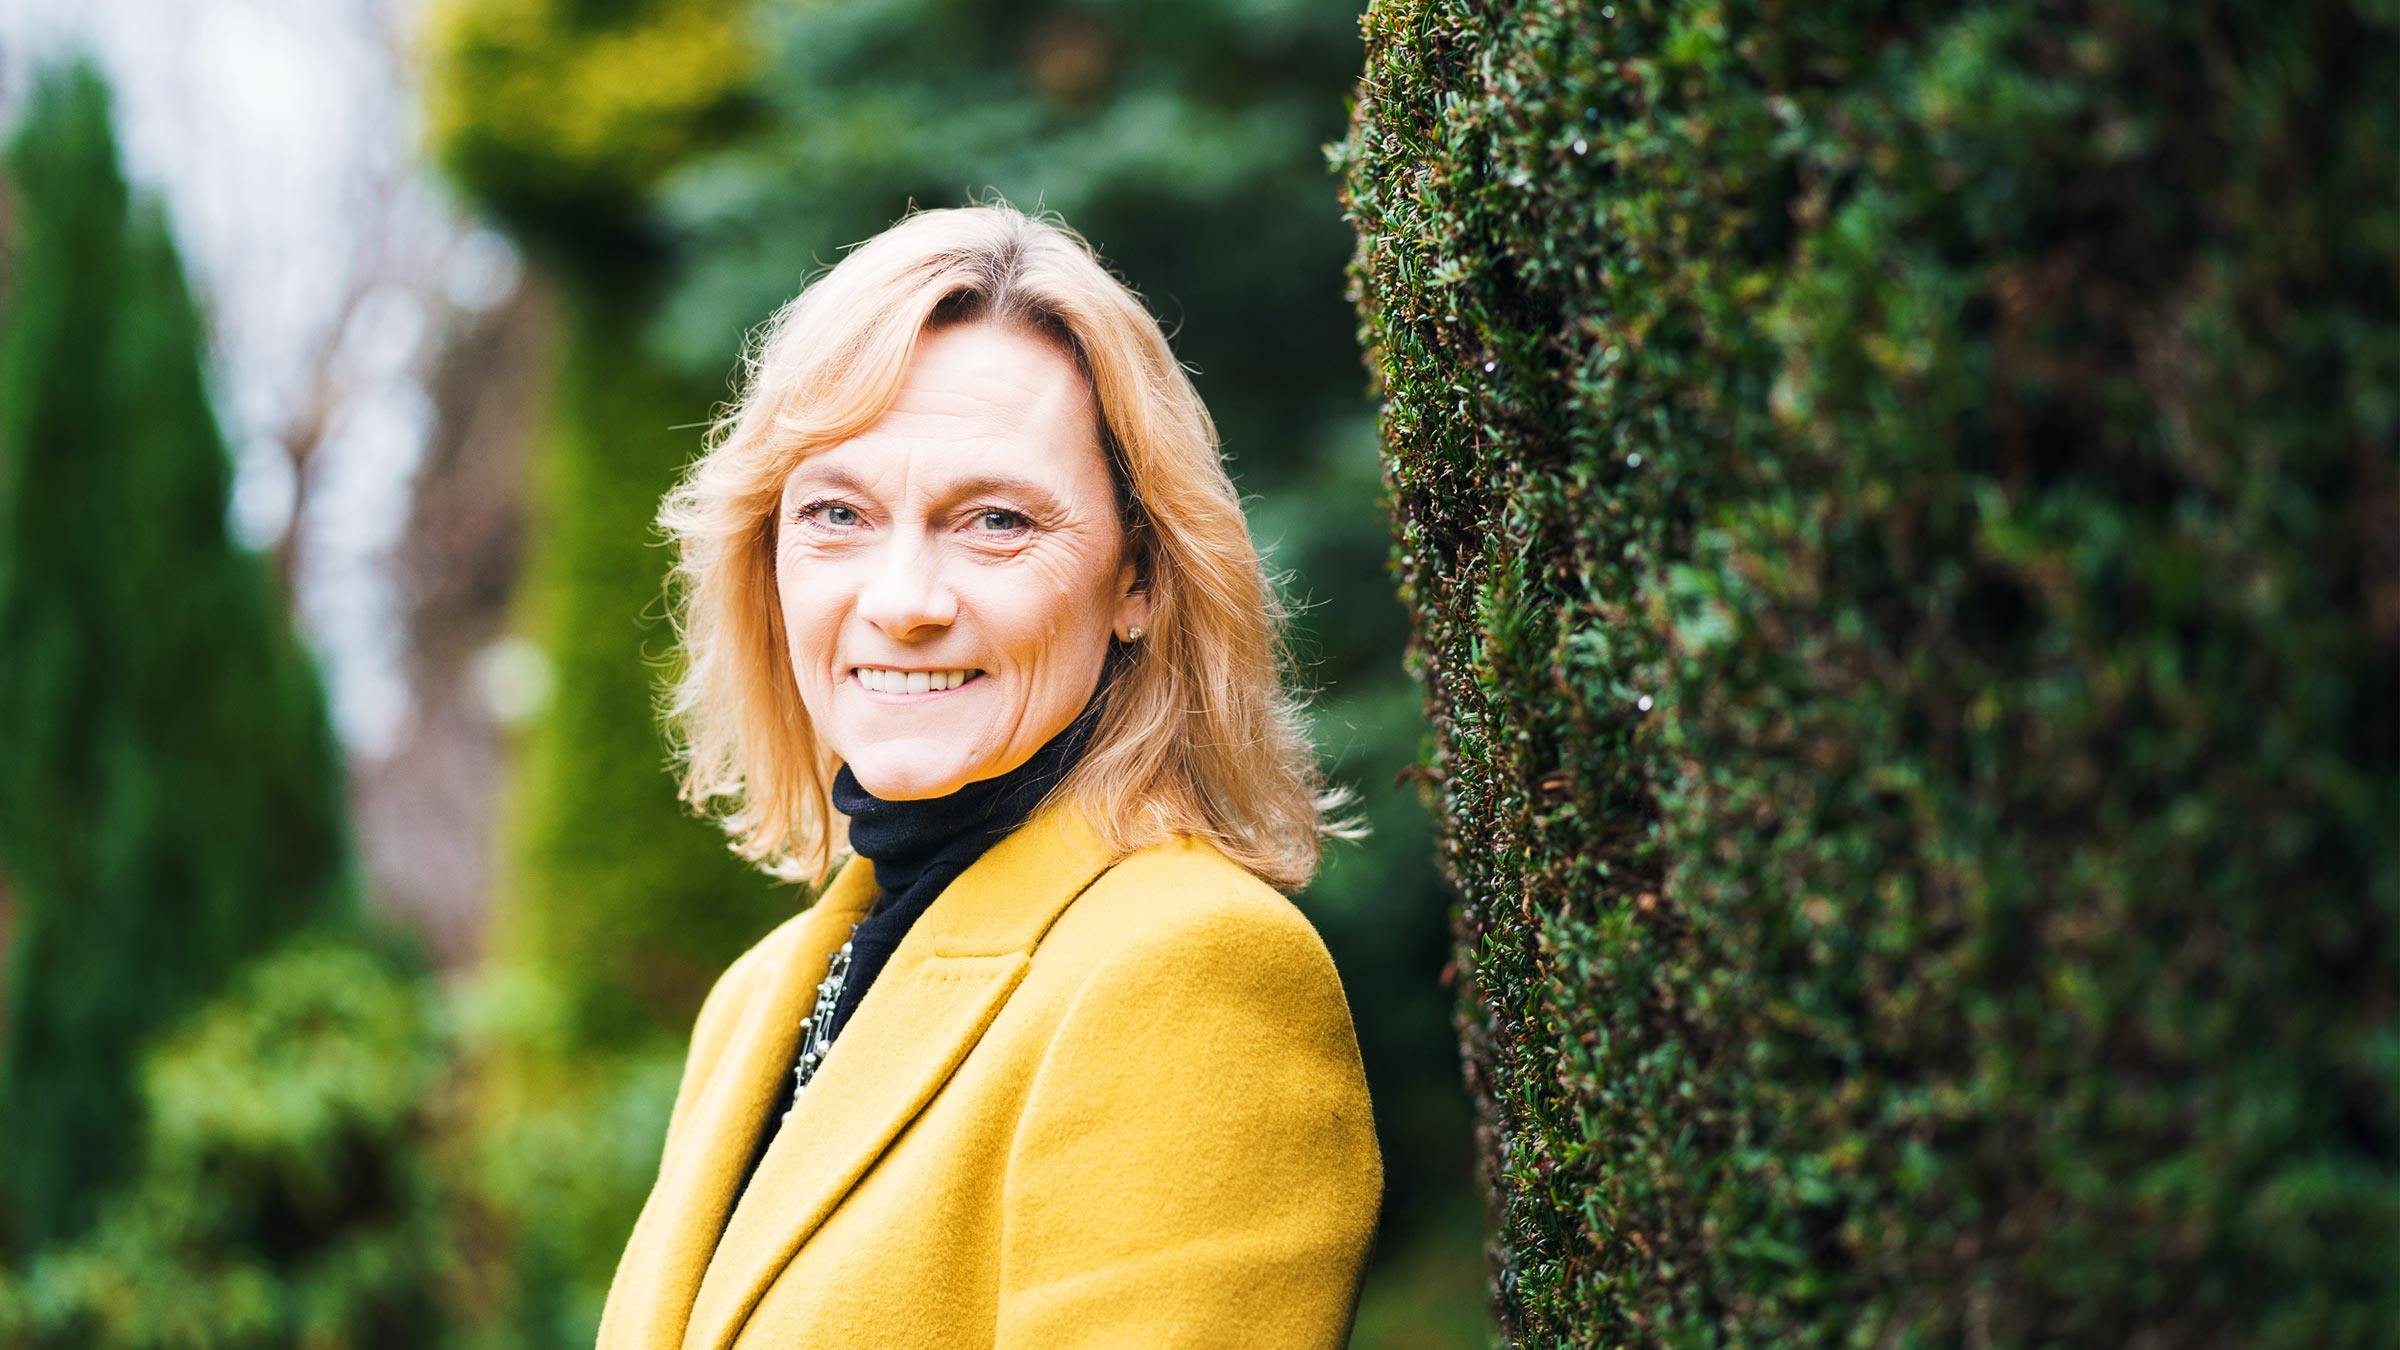 In for a penny… In conversation with Pennies CEO, Alison Hutchinson CBE